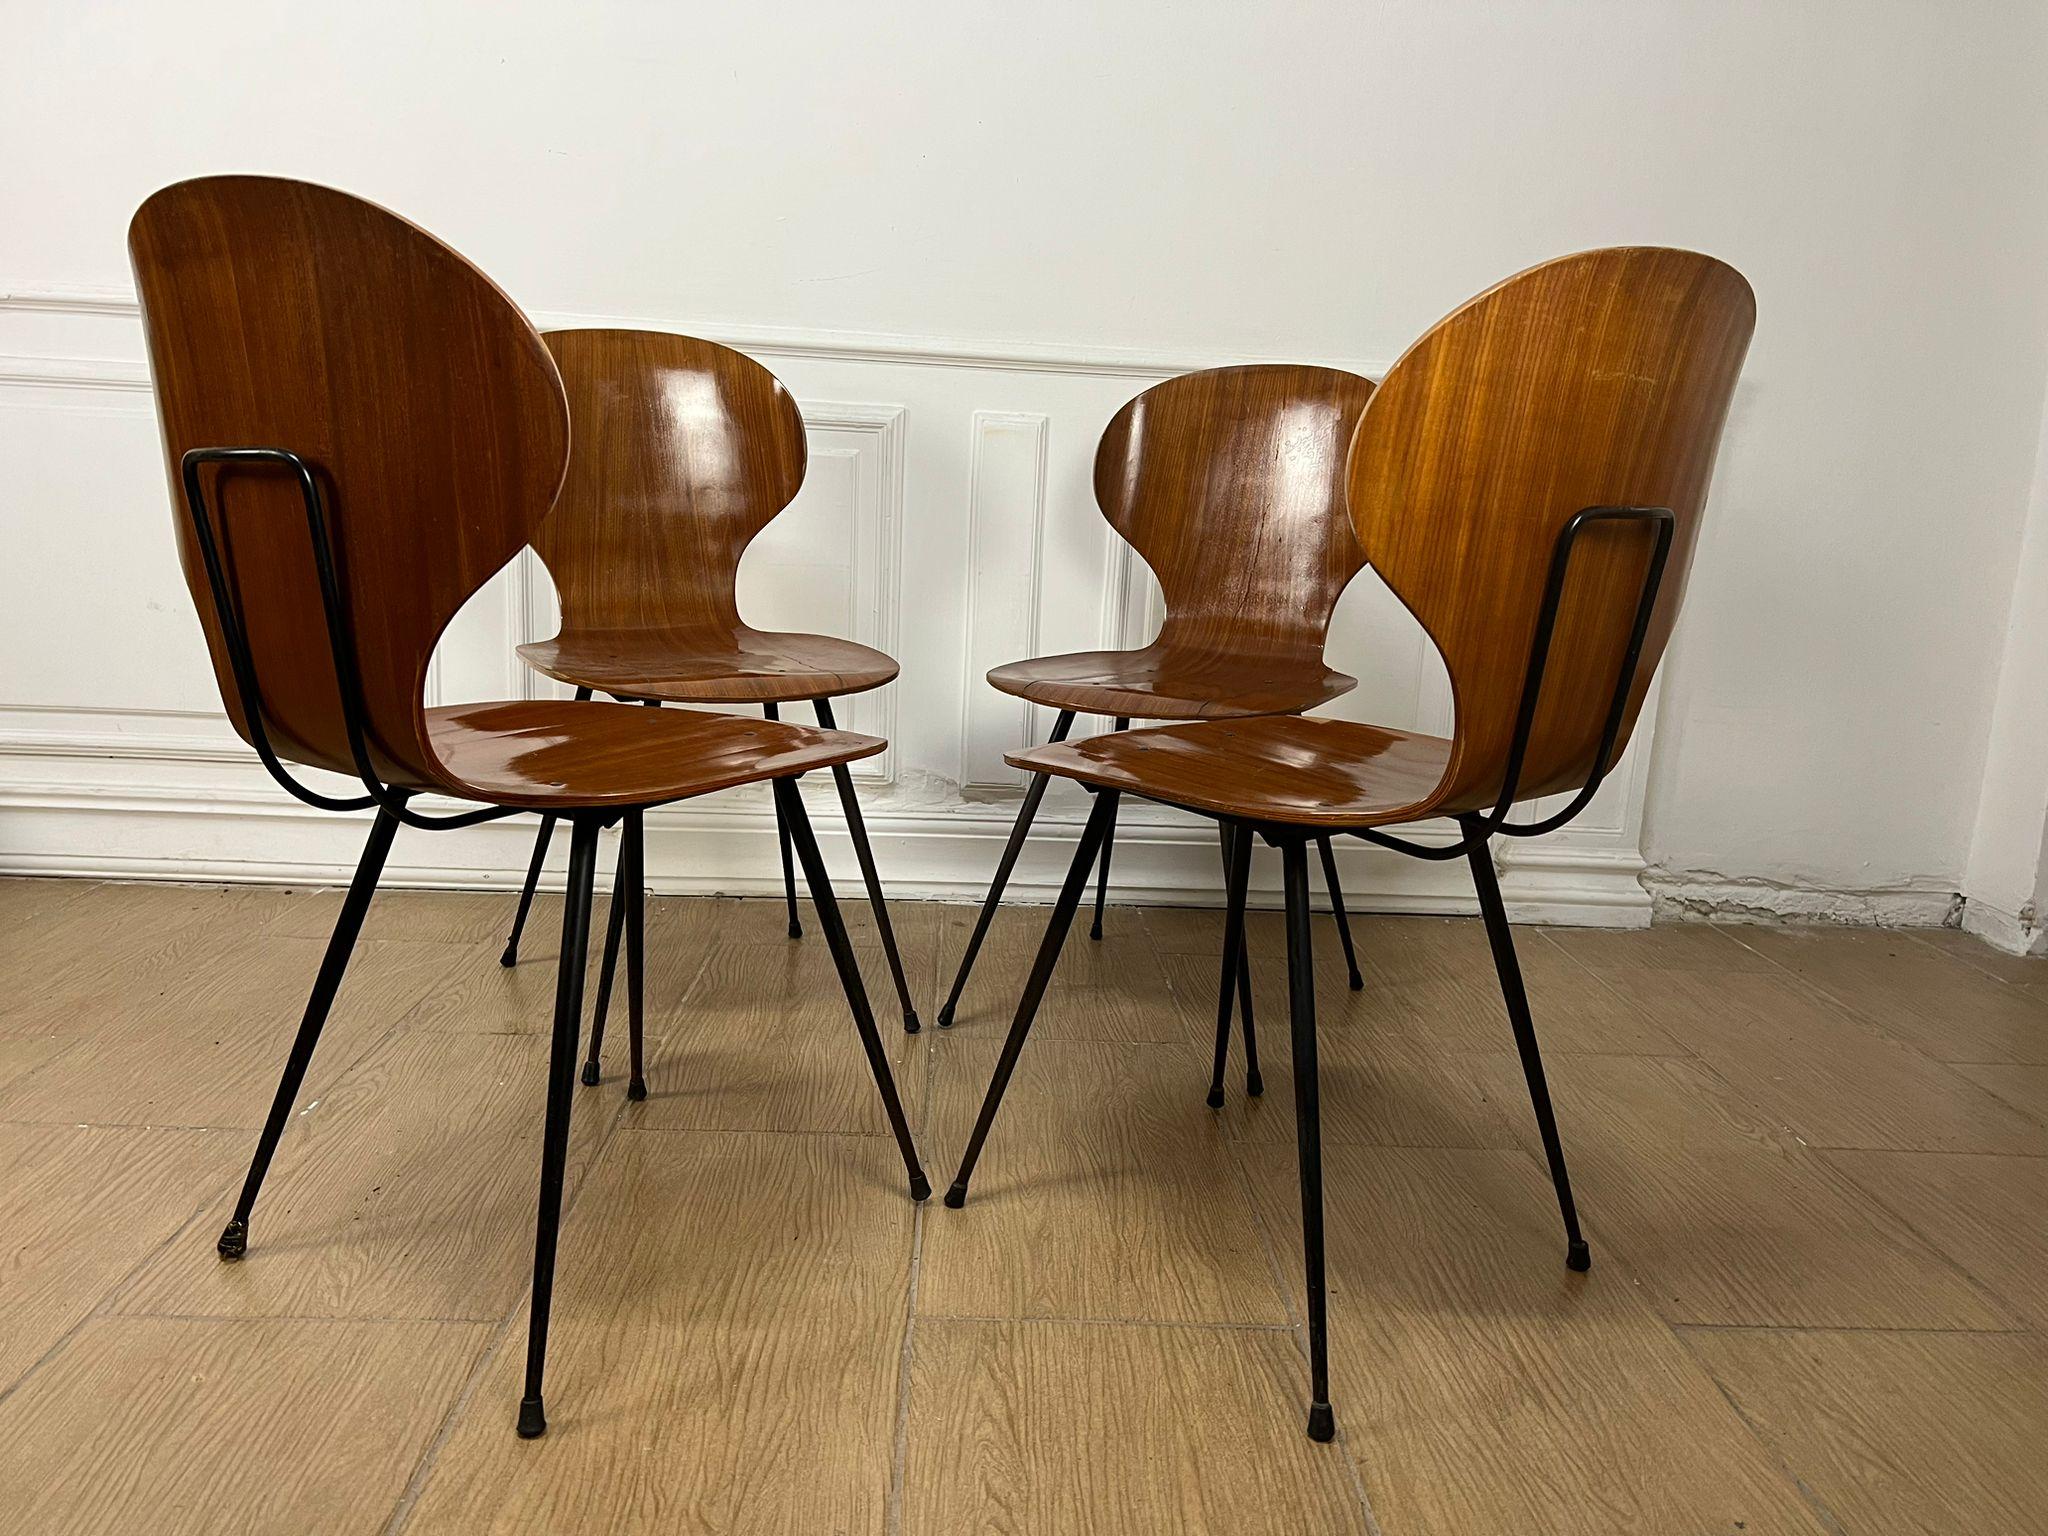 Set of four midcentury Lulli Chairs by Carlo Ratti for Industria Legni Curvati Lissone made in Italy in the 1970s.
Shell in curved plywood, veneered in teak, and particular legs in black painted iron. The chair was designed by Carlo Ratti in